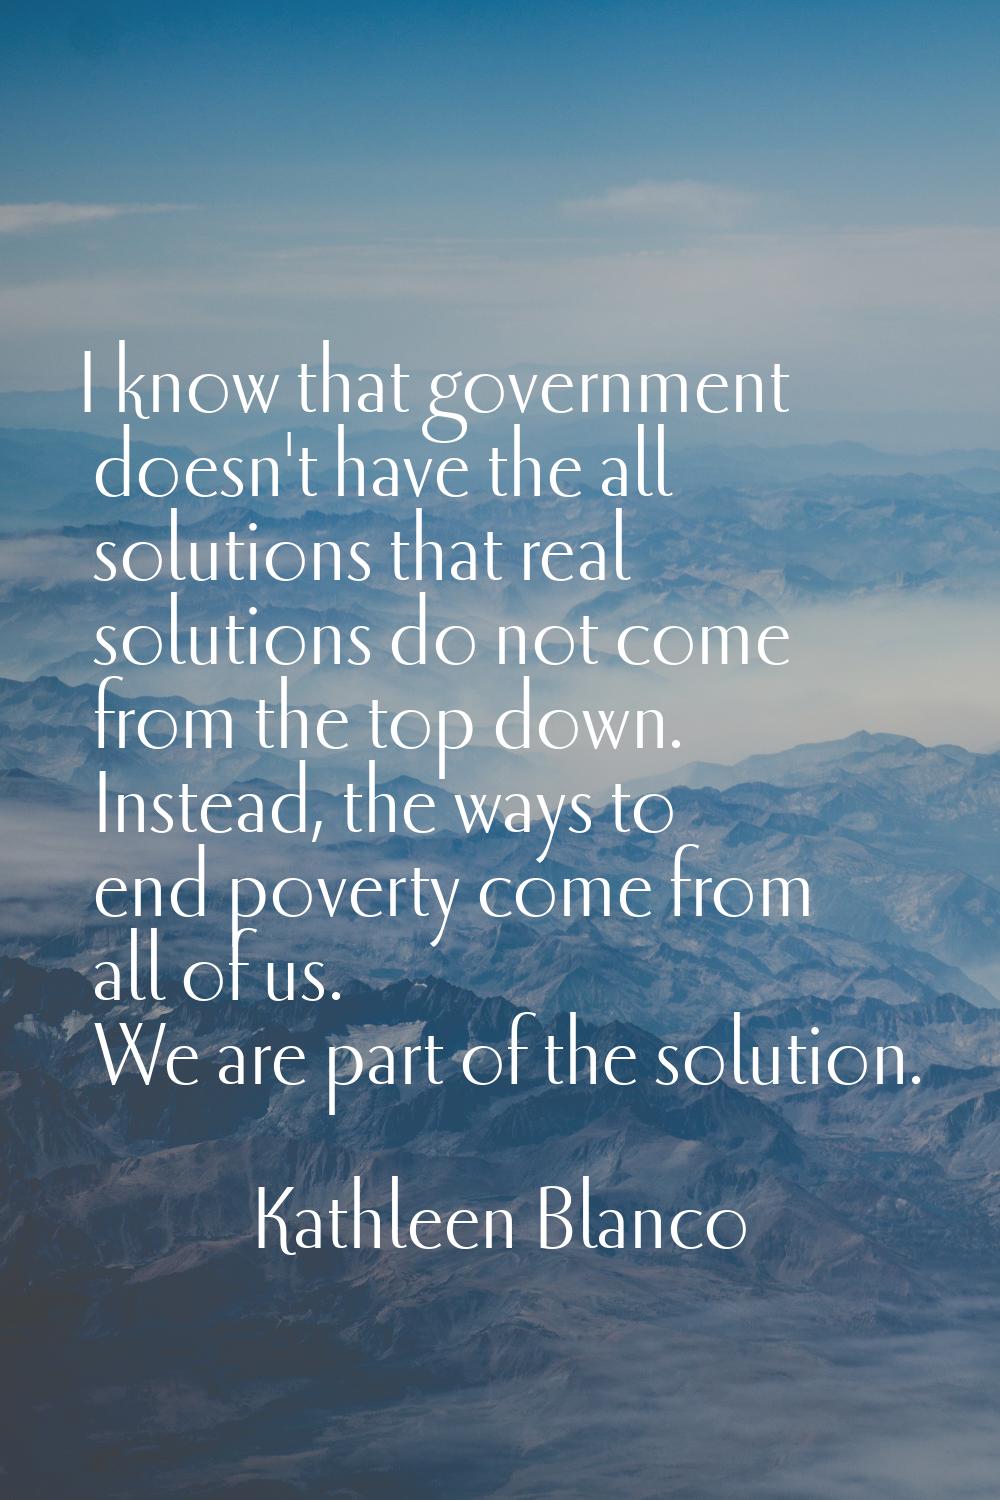 I know that government doesn't have the all solutions that real solutions do not come from the top 